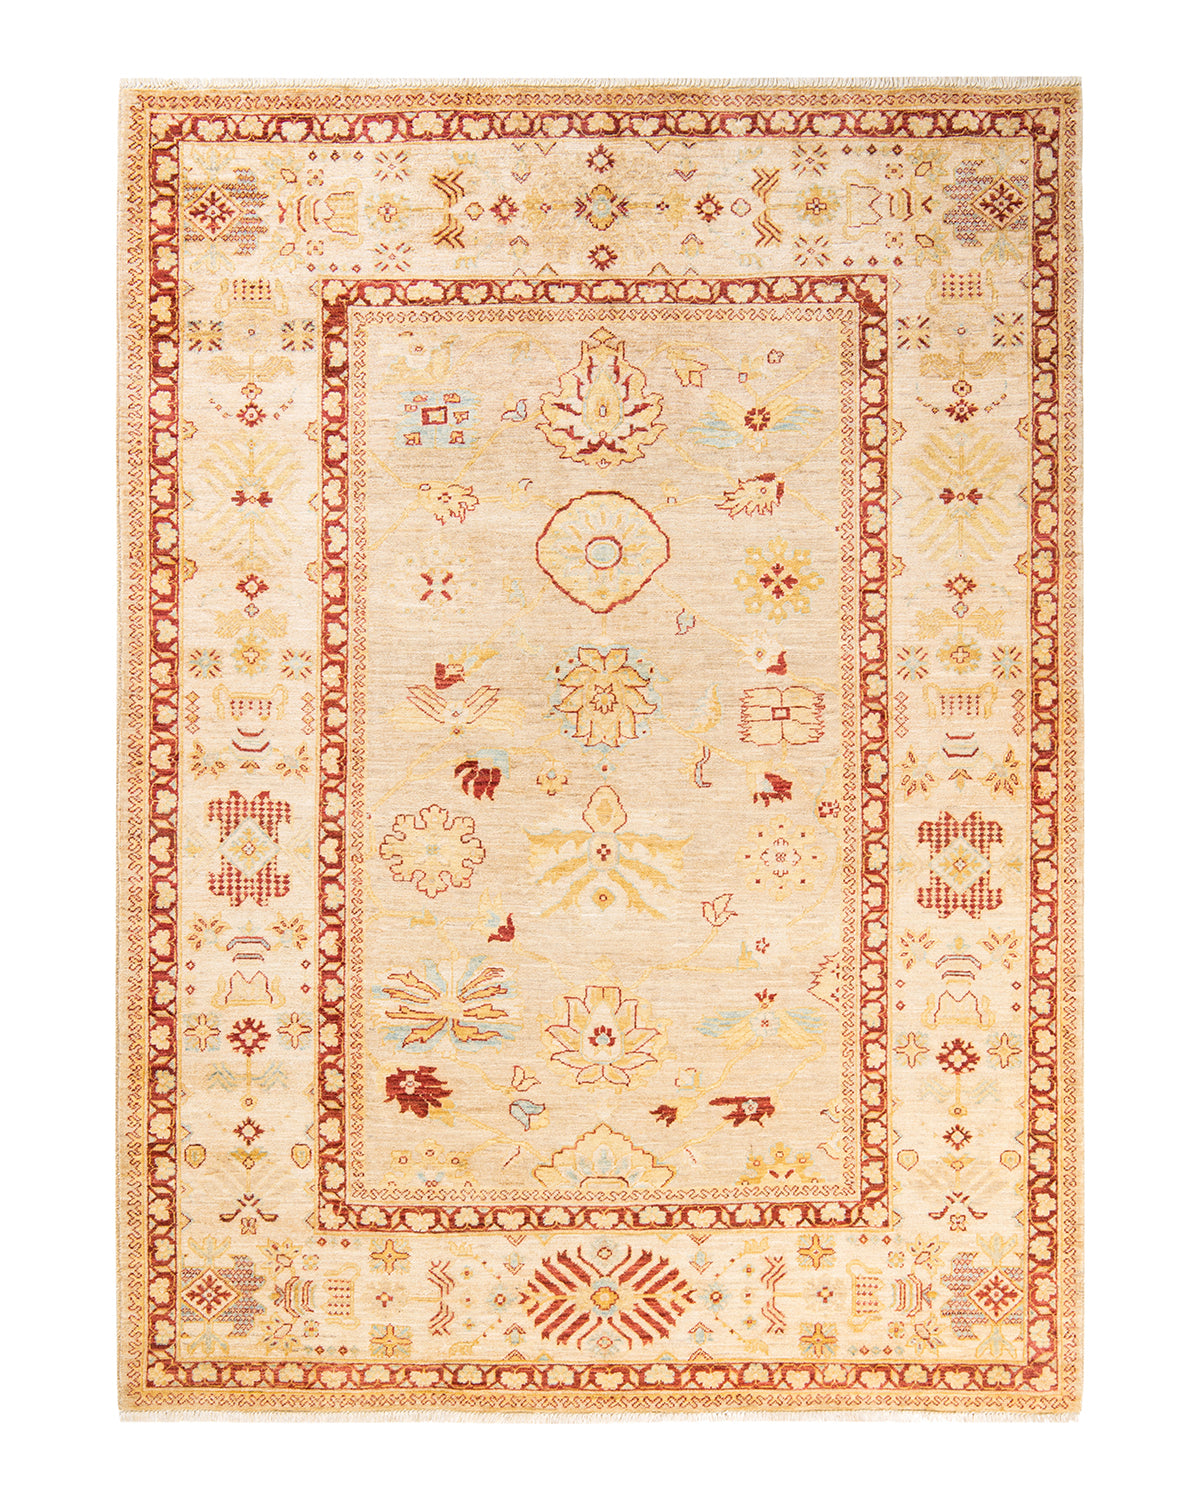 Eclectic, One-of-a-Kind Hand-Knotted Area Rug  - Ivory, 6' 5" x 8' 10"